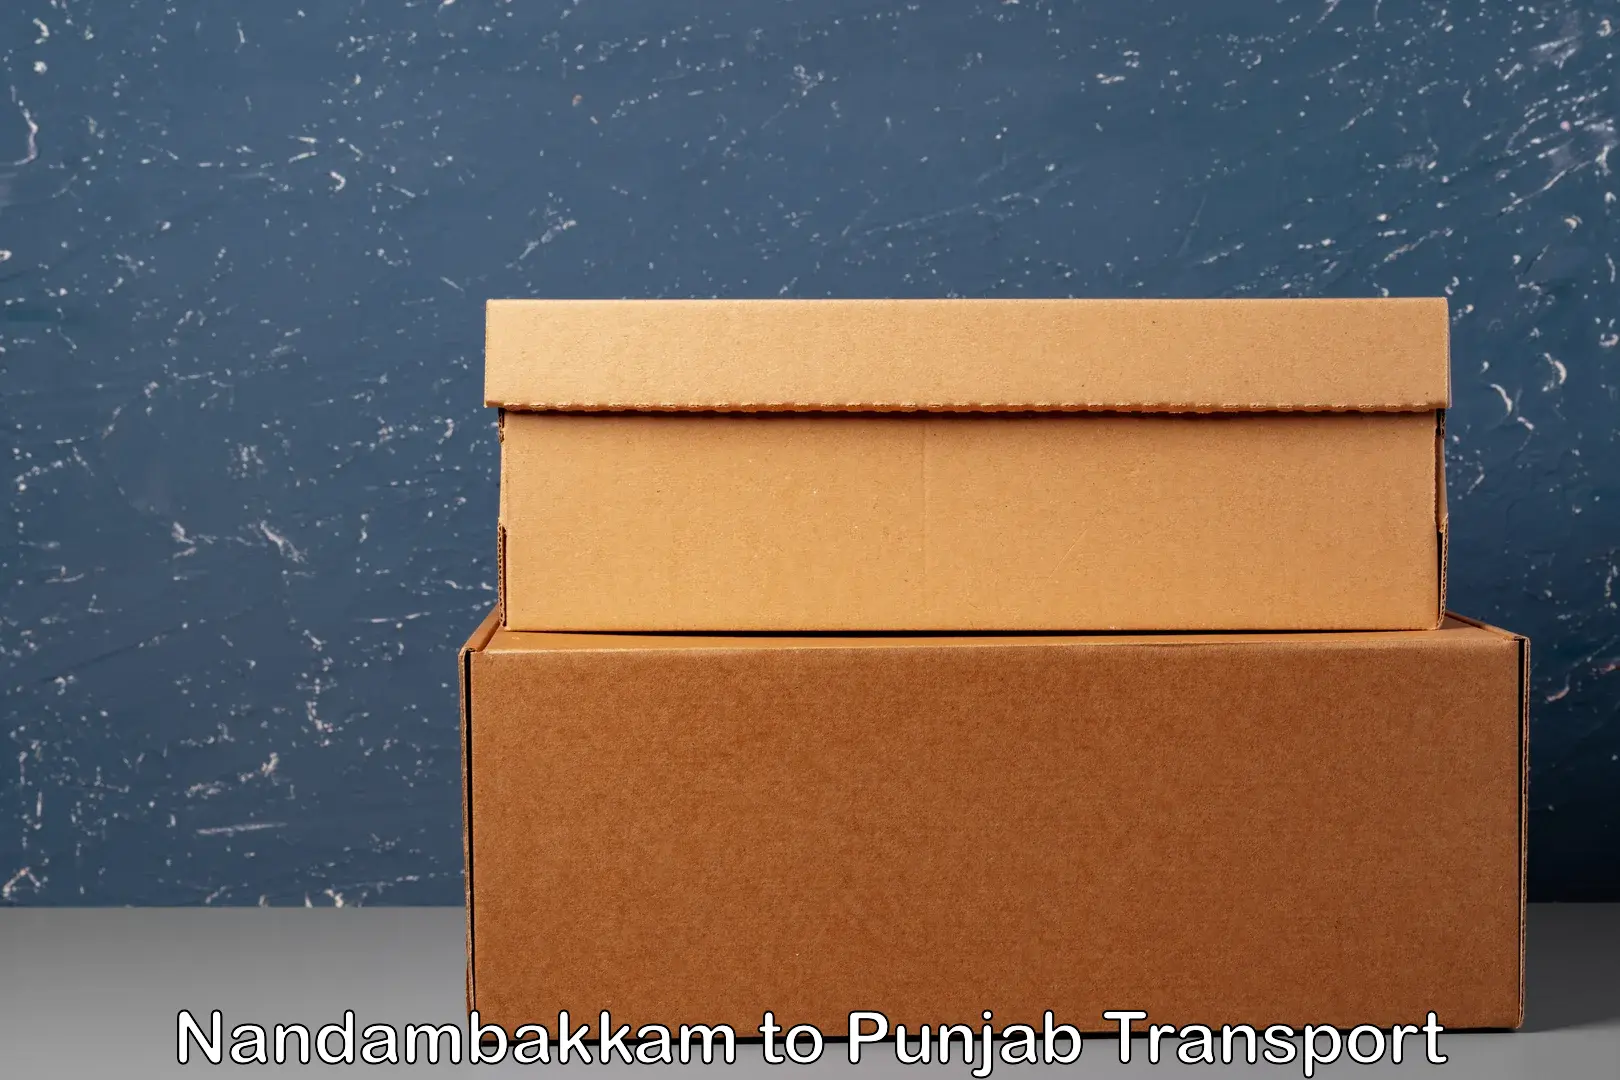 Container transport service Nandambakkam to IIT Ropar